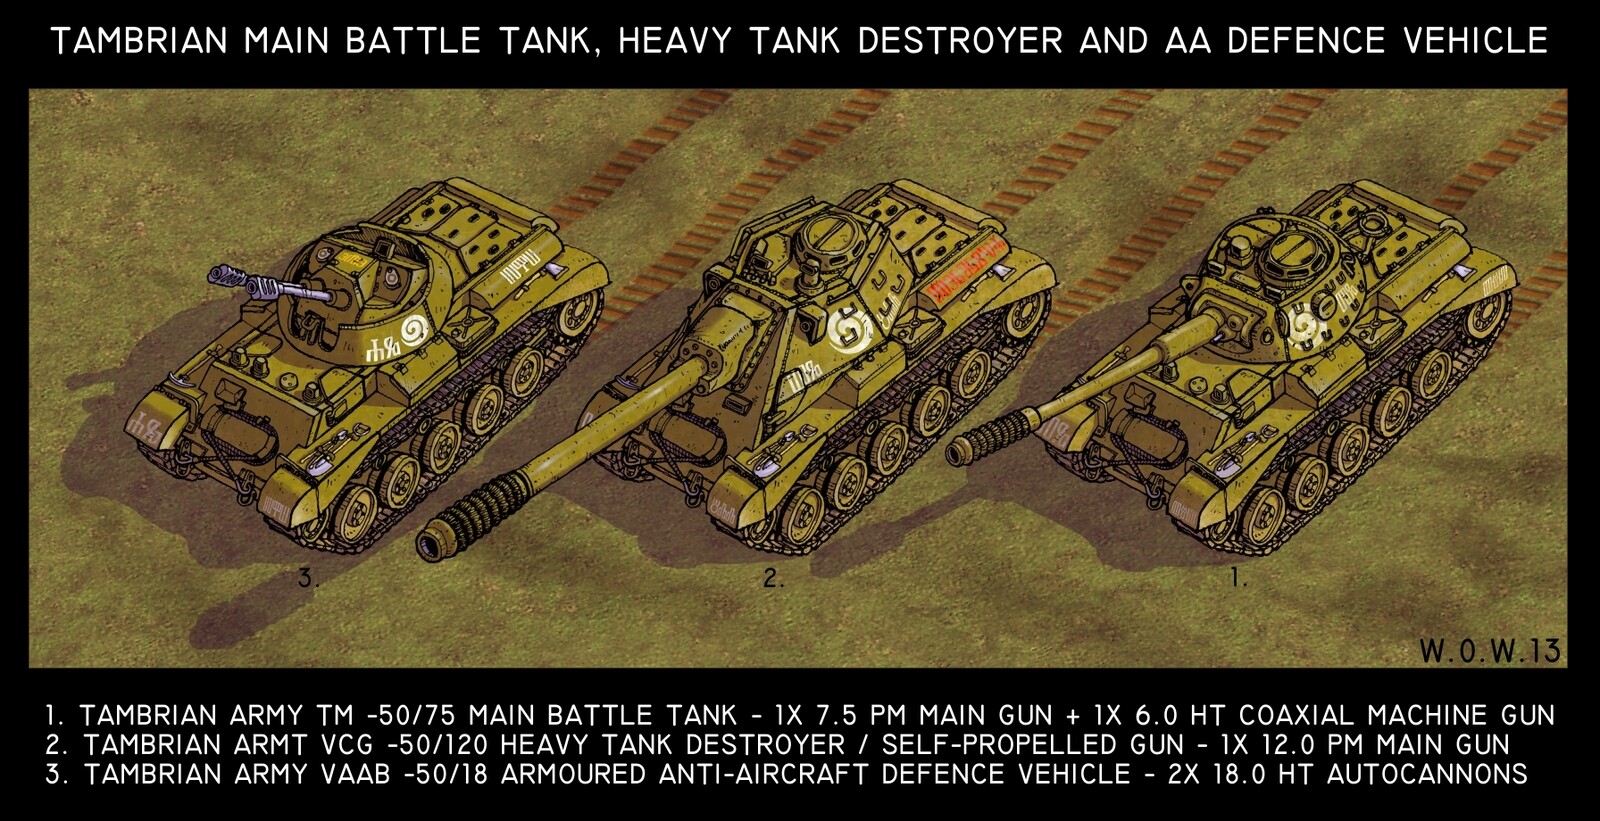 Tambrian heavy tanks, several variations on the same chassis - main battle tank, turret-less tank hunter and anti-aircraft vehicle. 